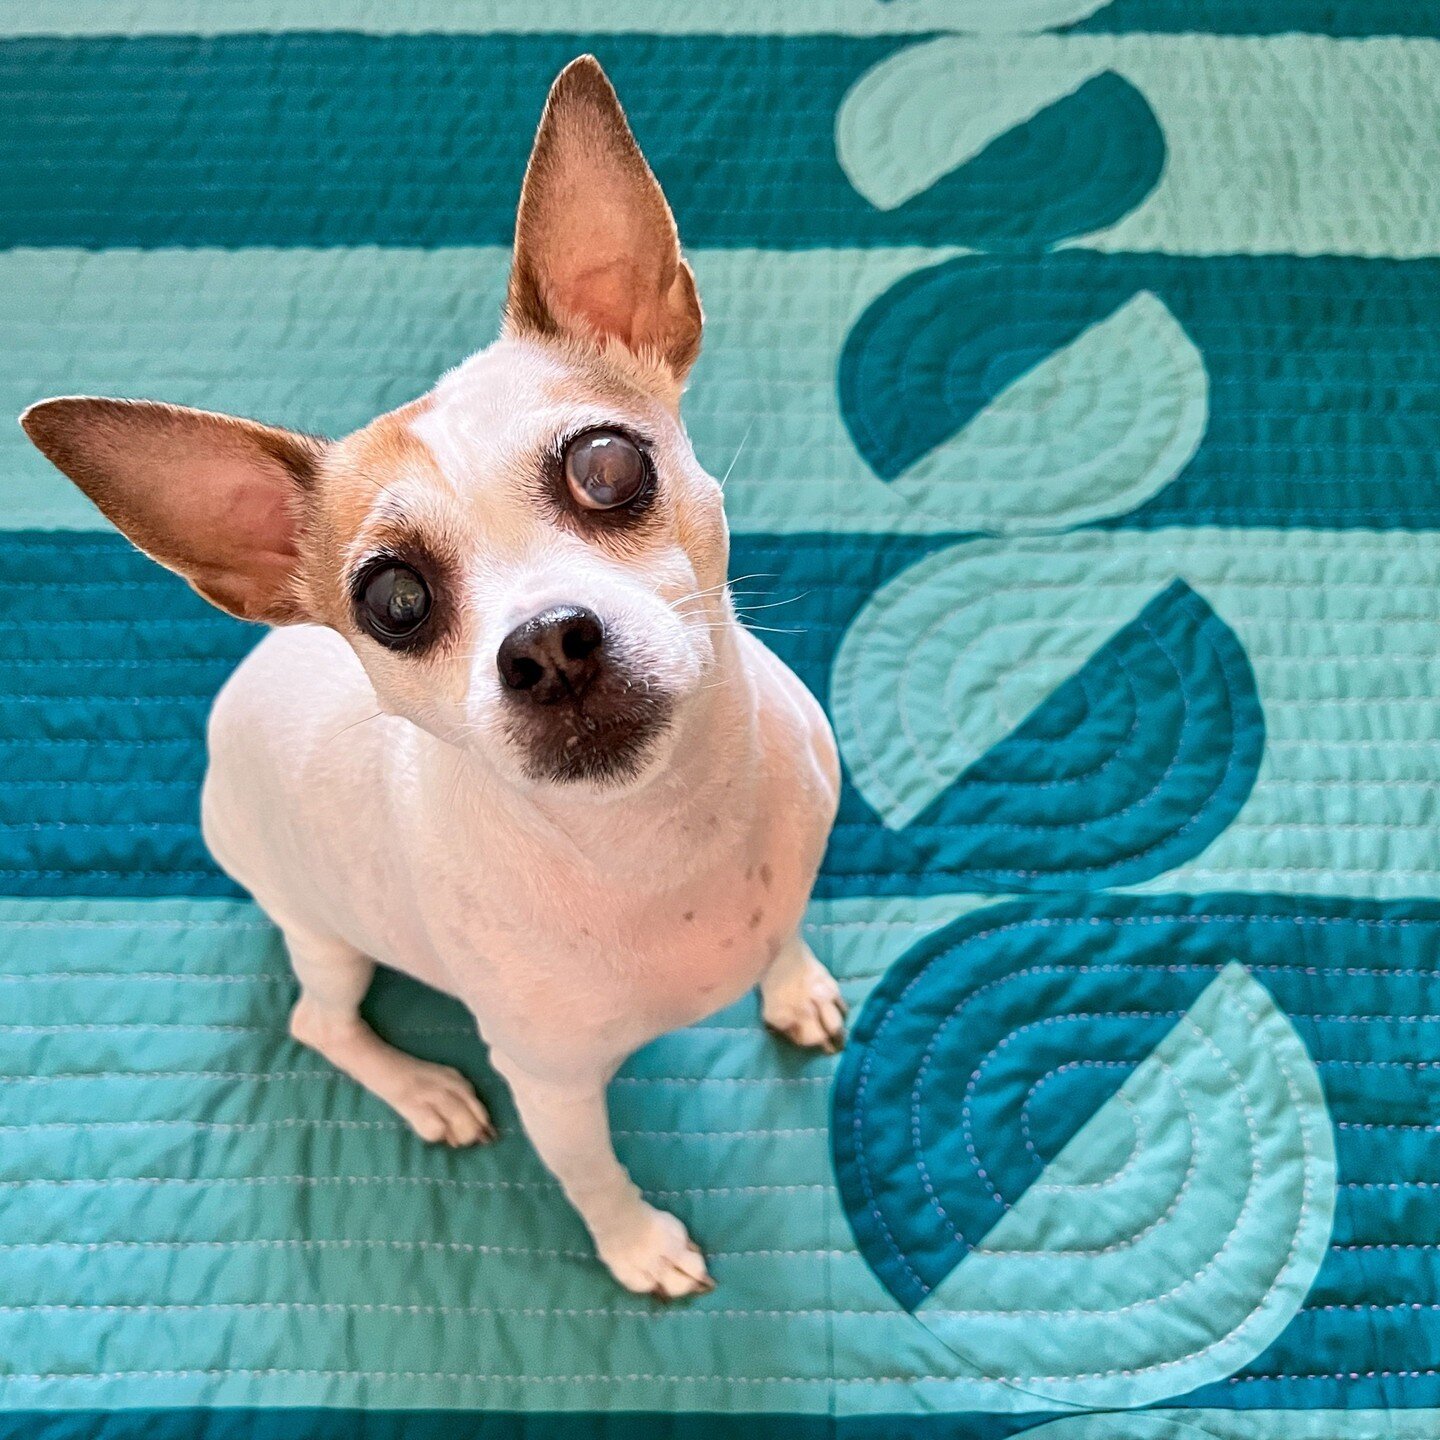 I adore this photo of Ms. Pixel posing on my #GinandTonicQuilt. She's such a charmer, so much so that I named my whole operation after her. She's (probably) a Jack Russel / Chihuahua mix, and she's full of snuggles and humor.⁣
.⁣
If the quilt somehow